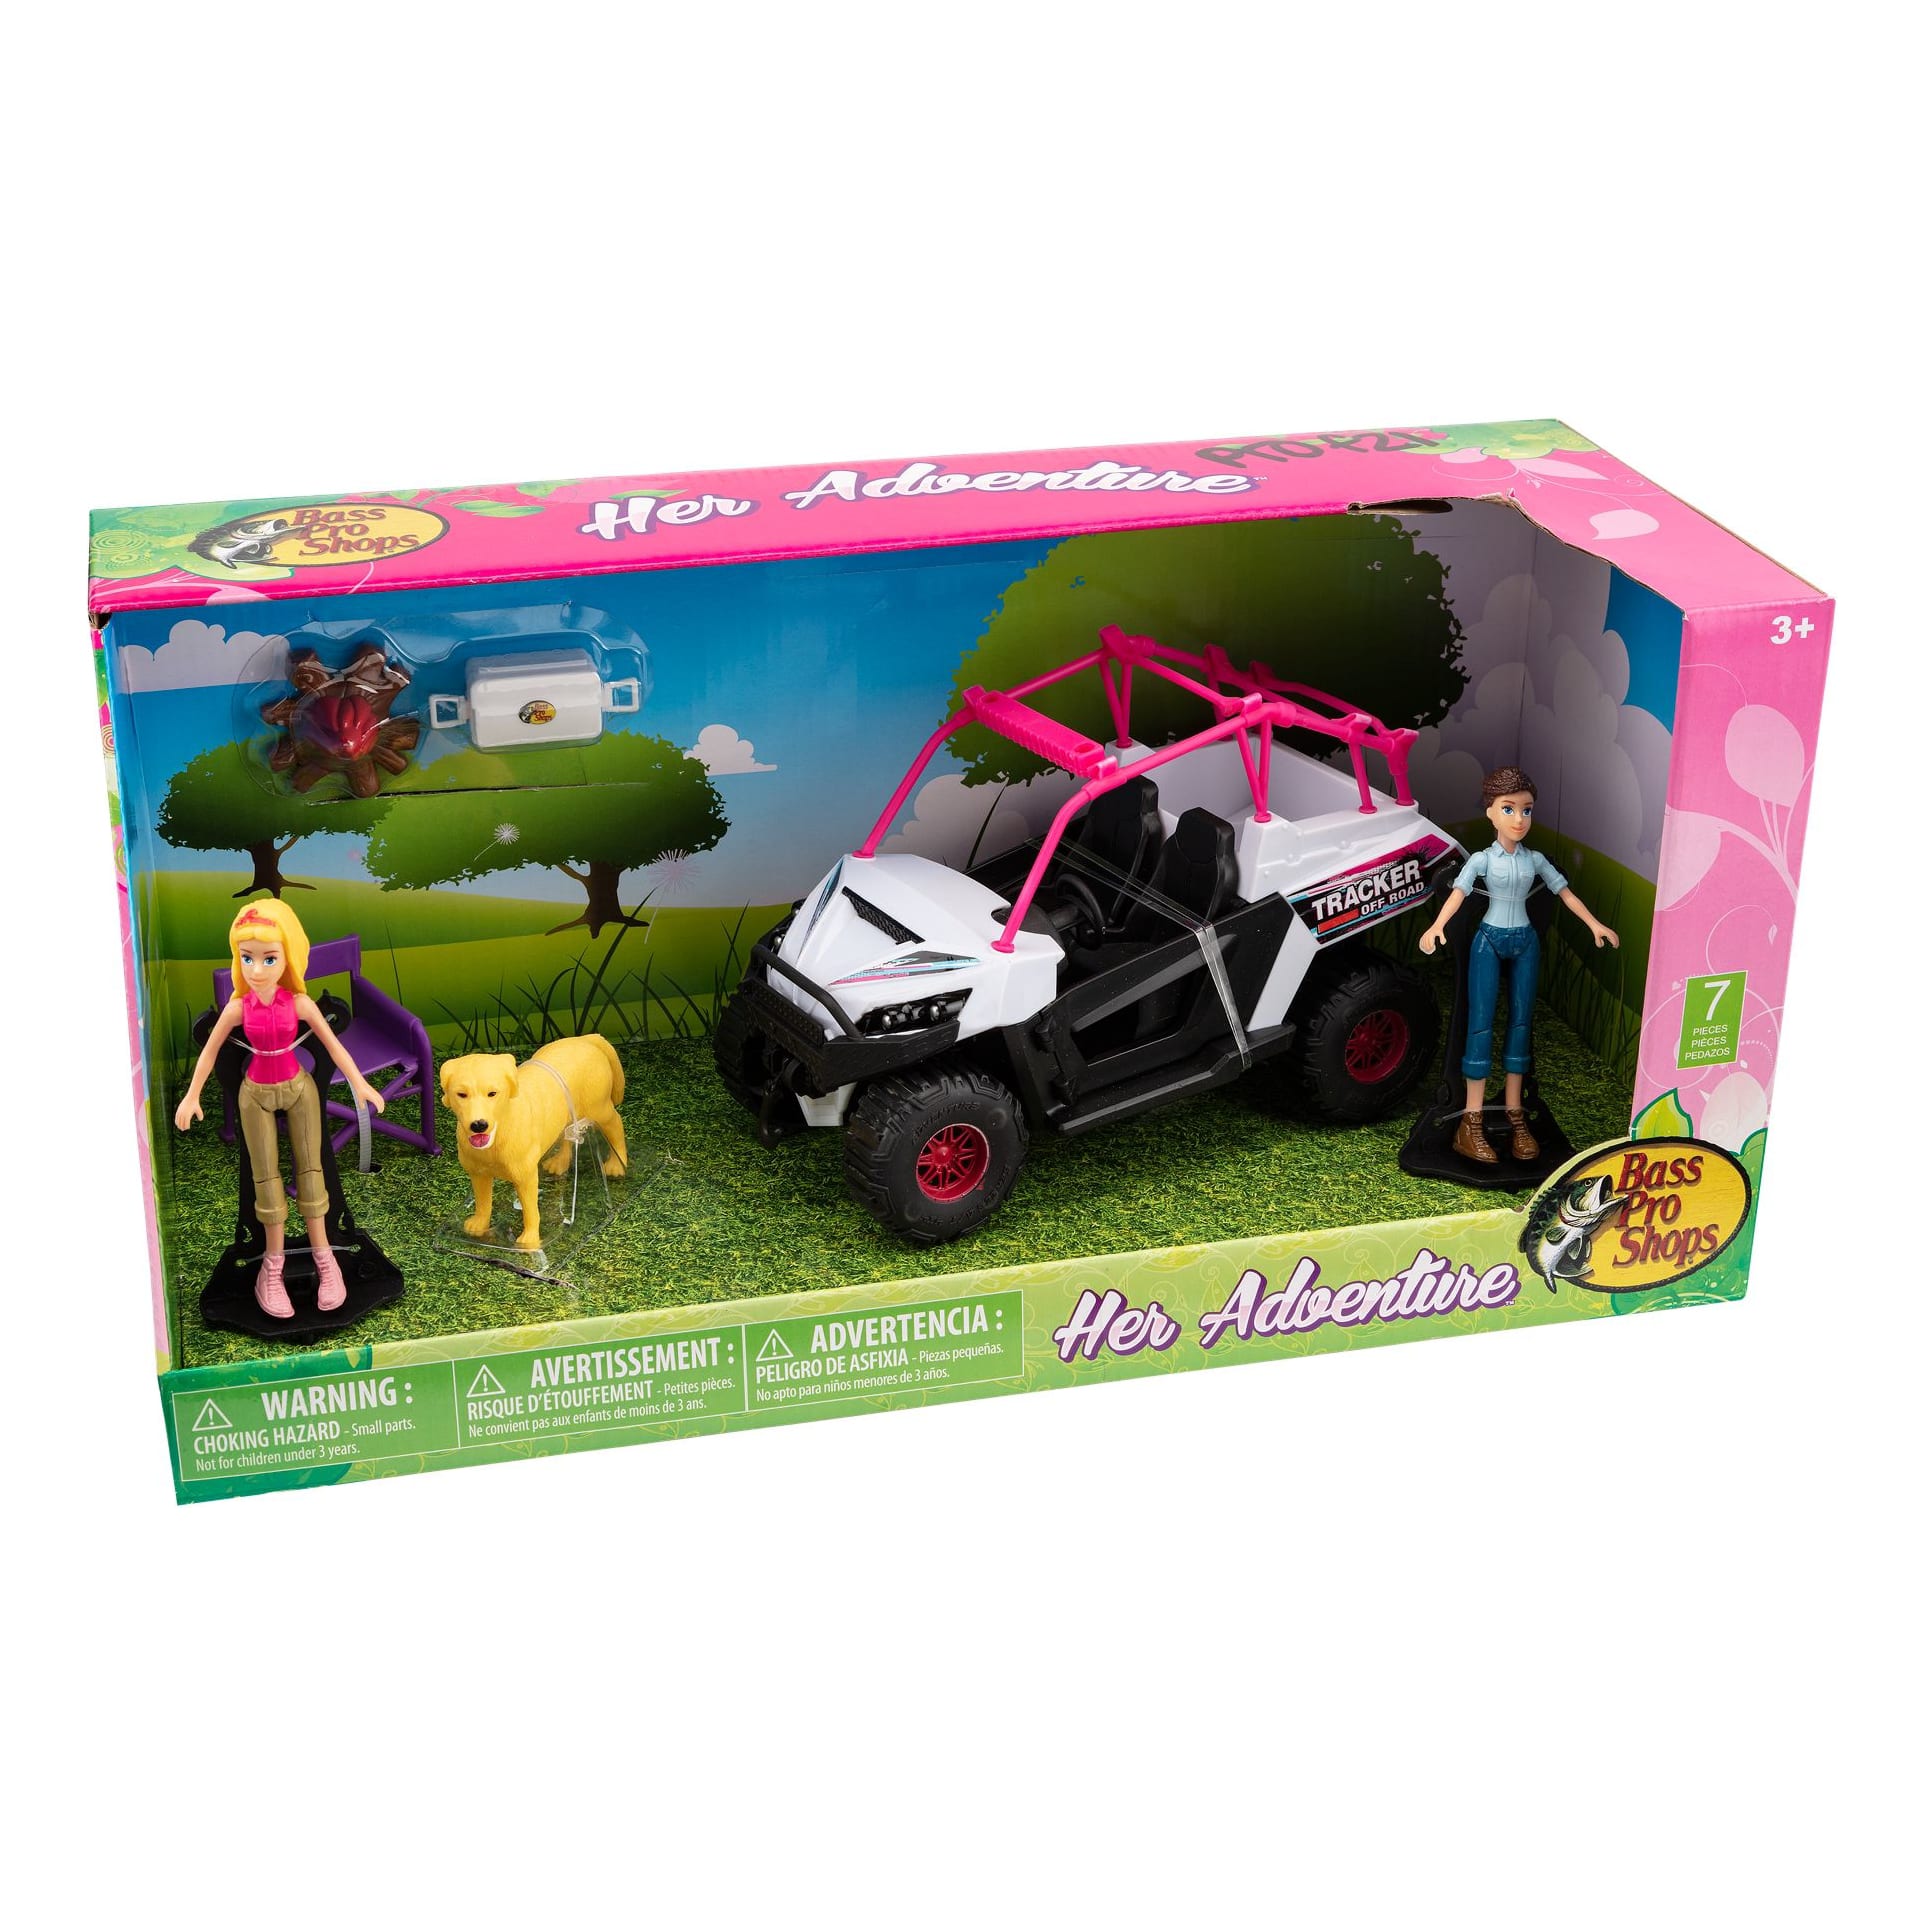 Bass Pro Shops® Her Imagination Adventure Side-by-Side Play Set for Kids